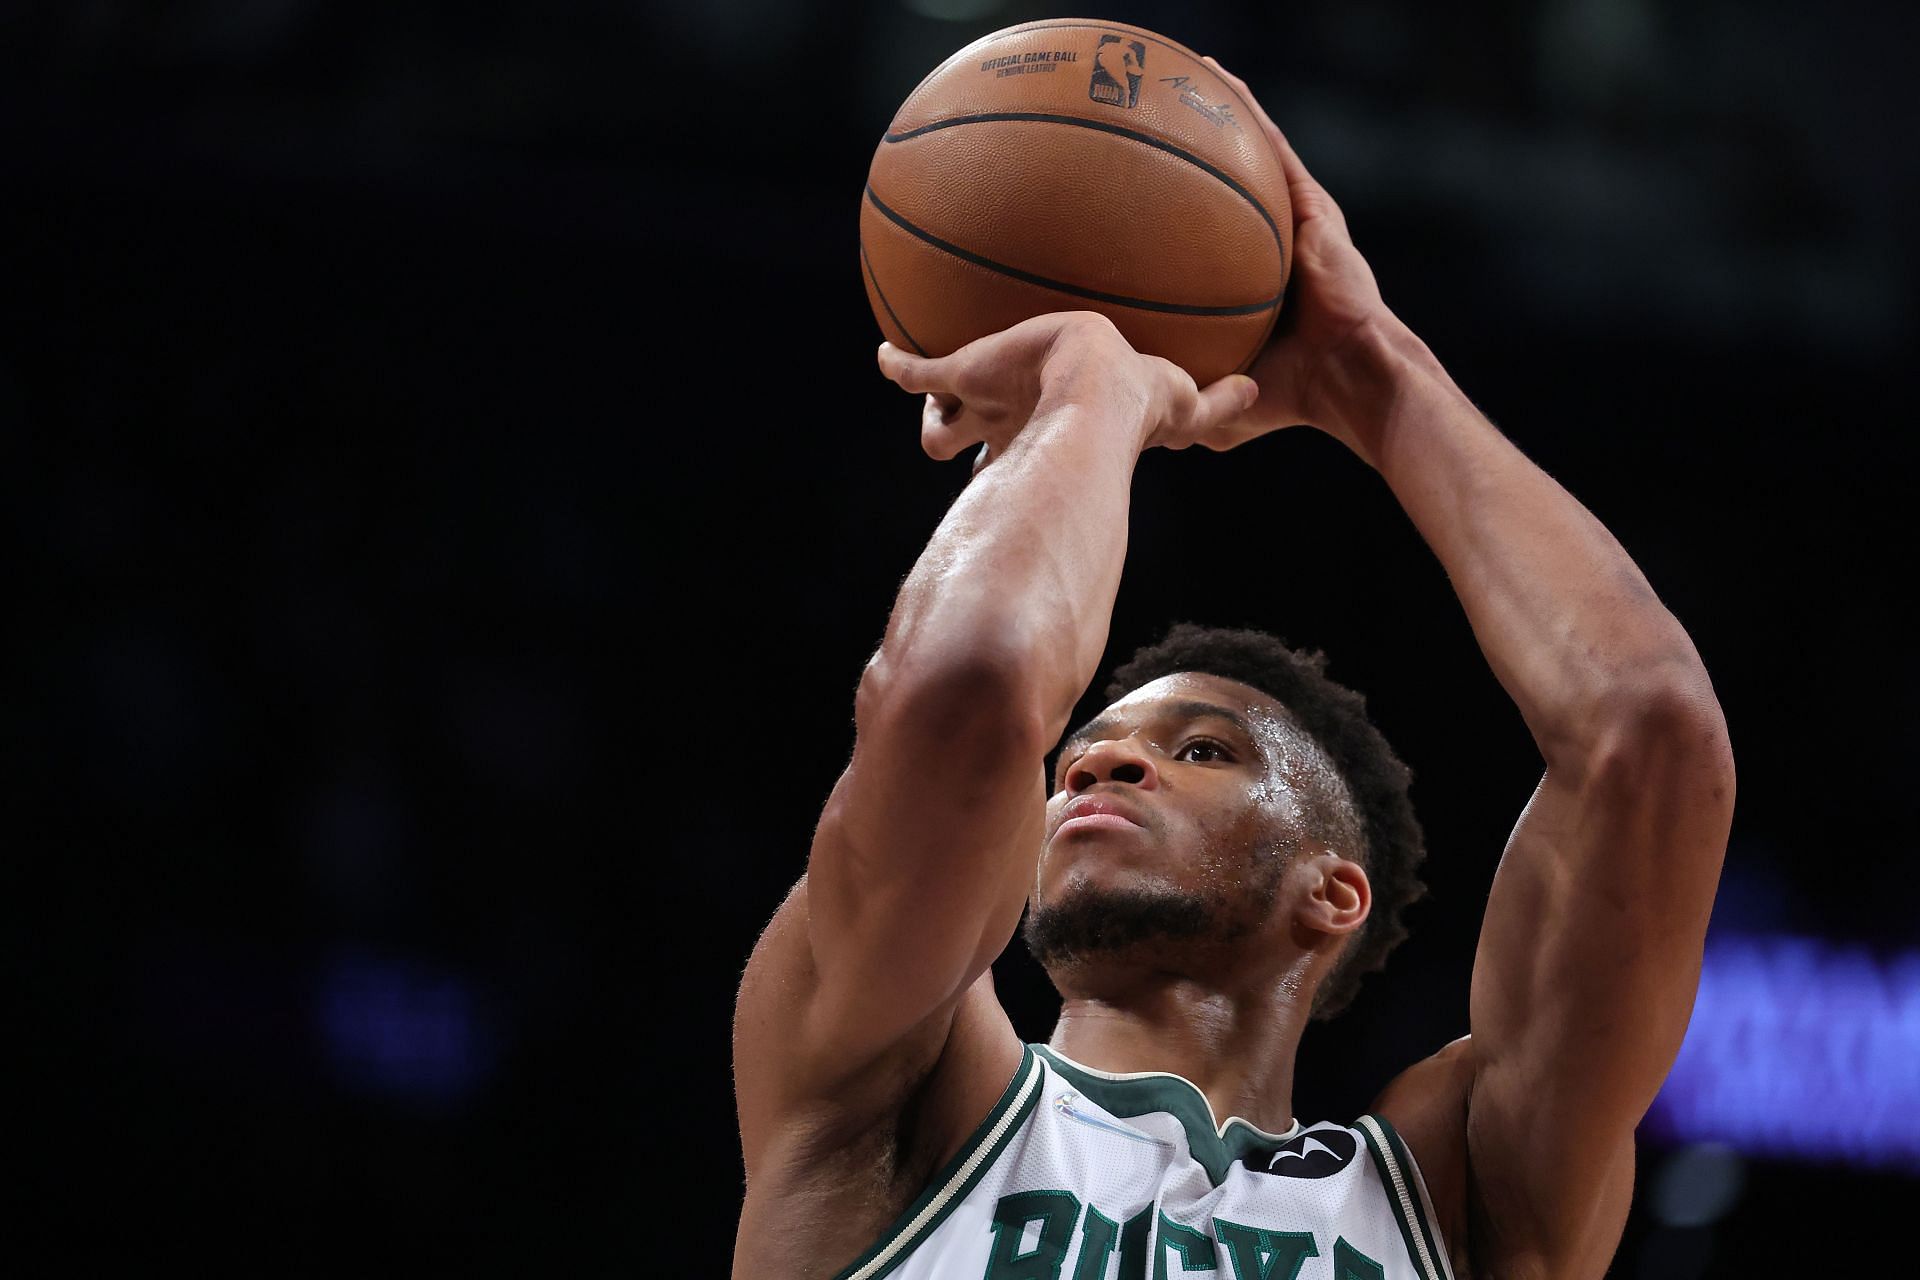 Antetokounmpo will be determined to wrap up the series at home